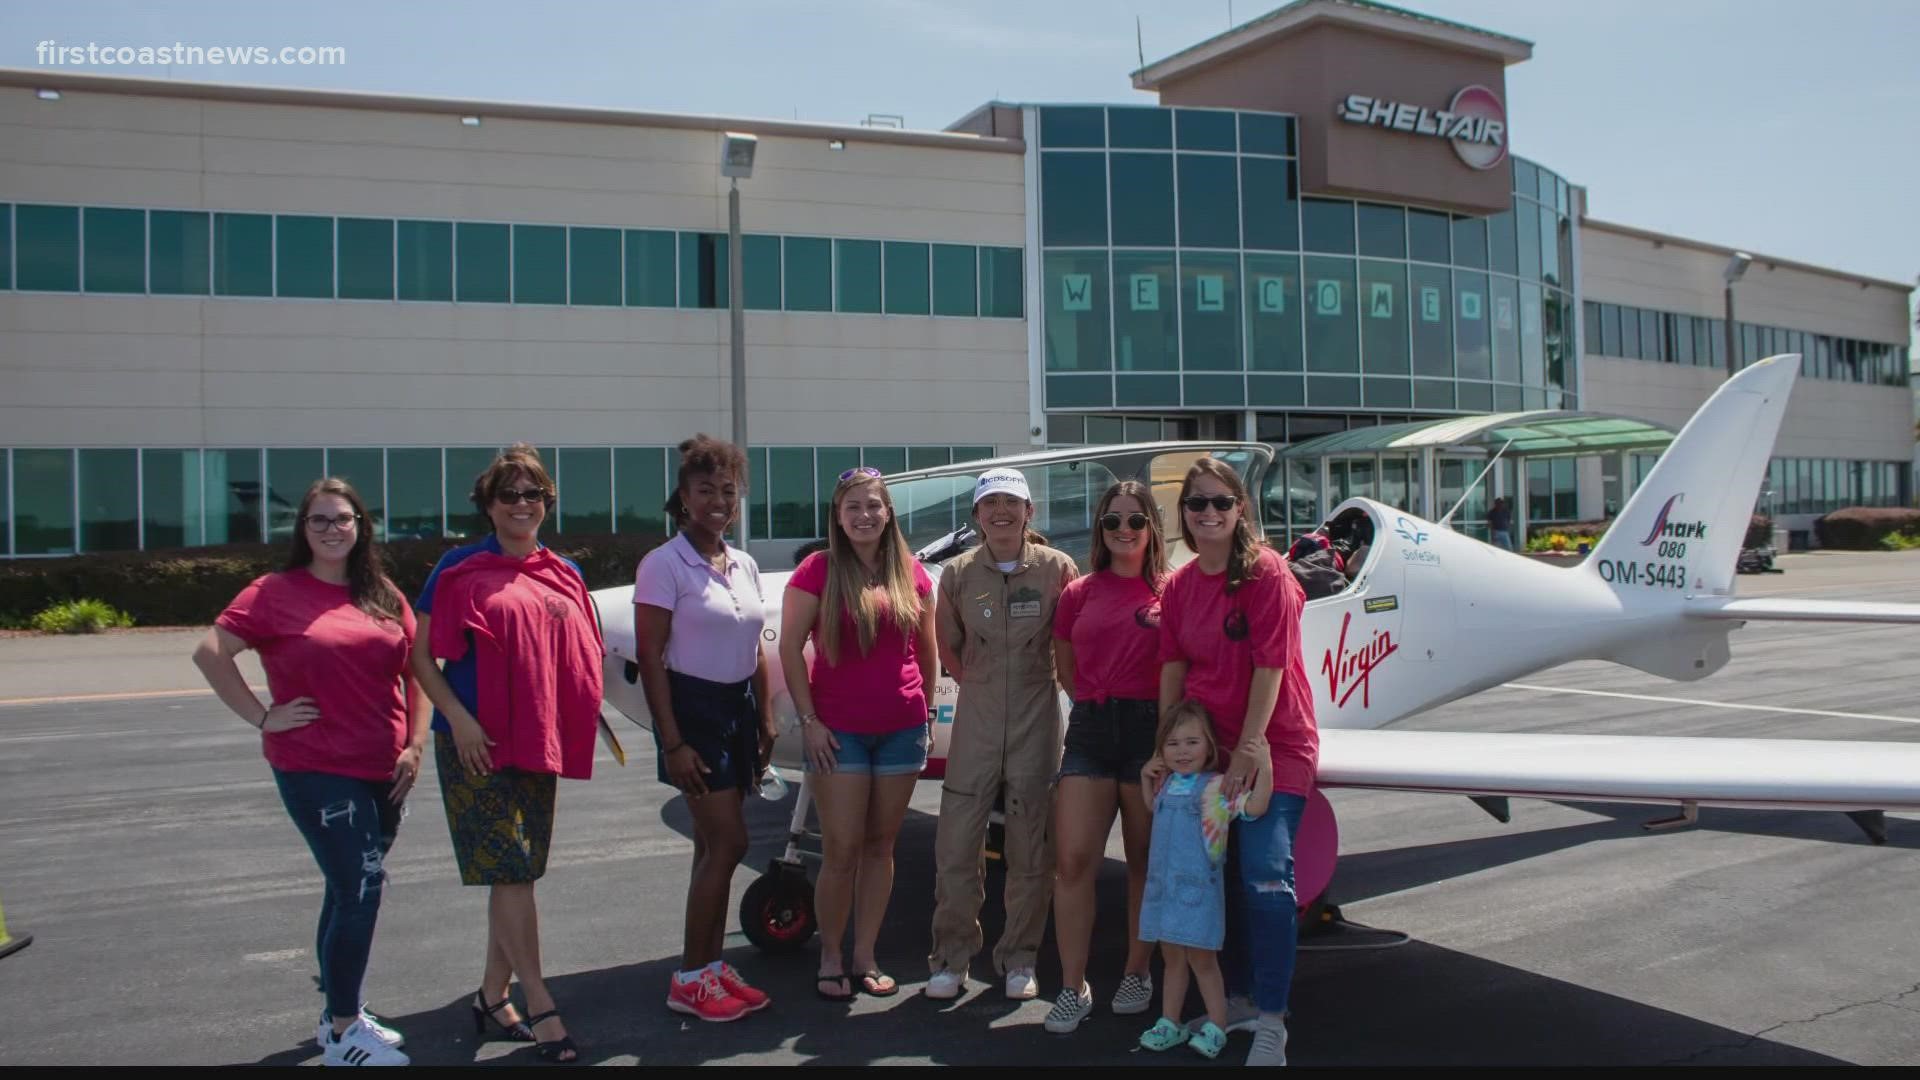 Jacksonville's Women in Aviation chapter welcomed 19-year-old Zara Rutherford to town on her way around the world.